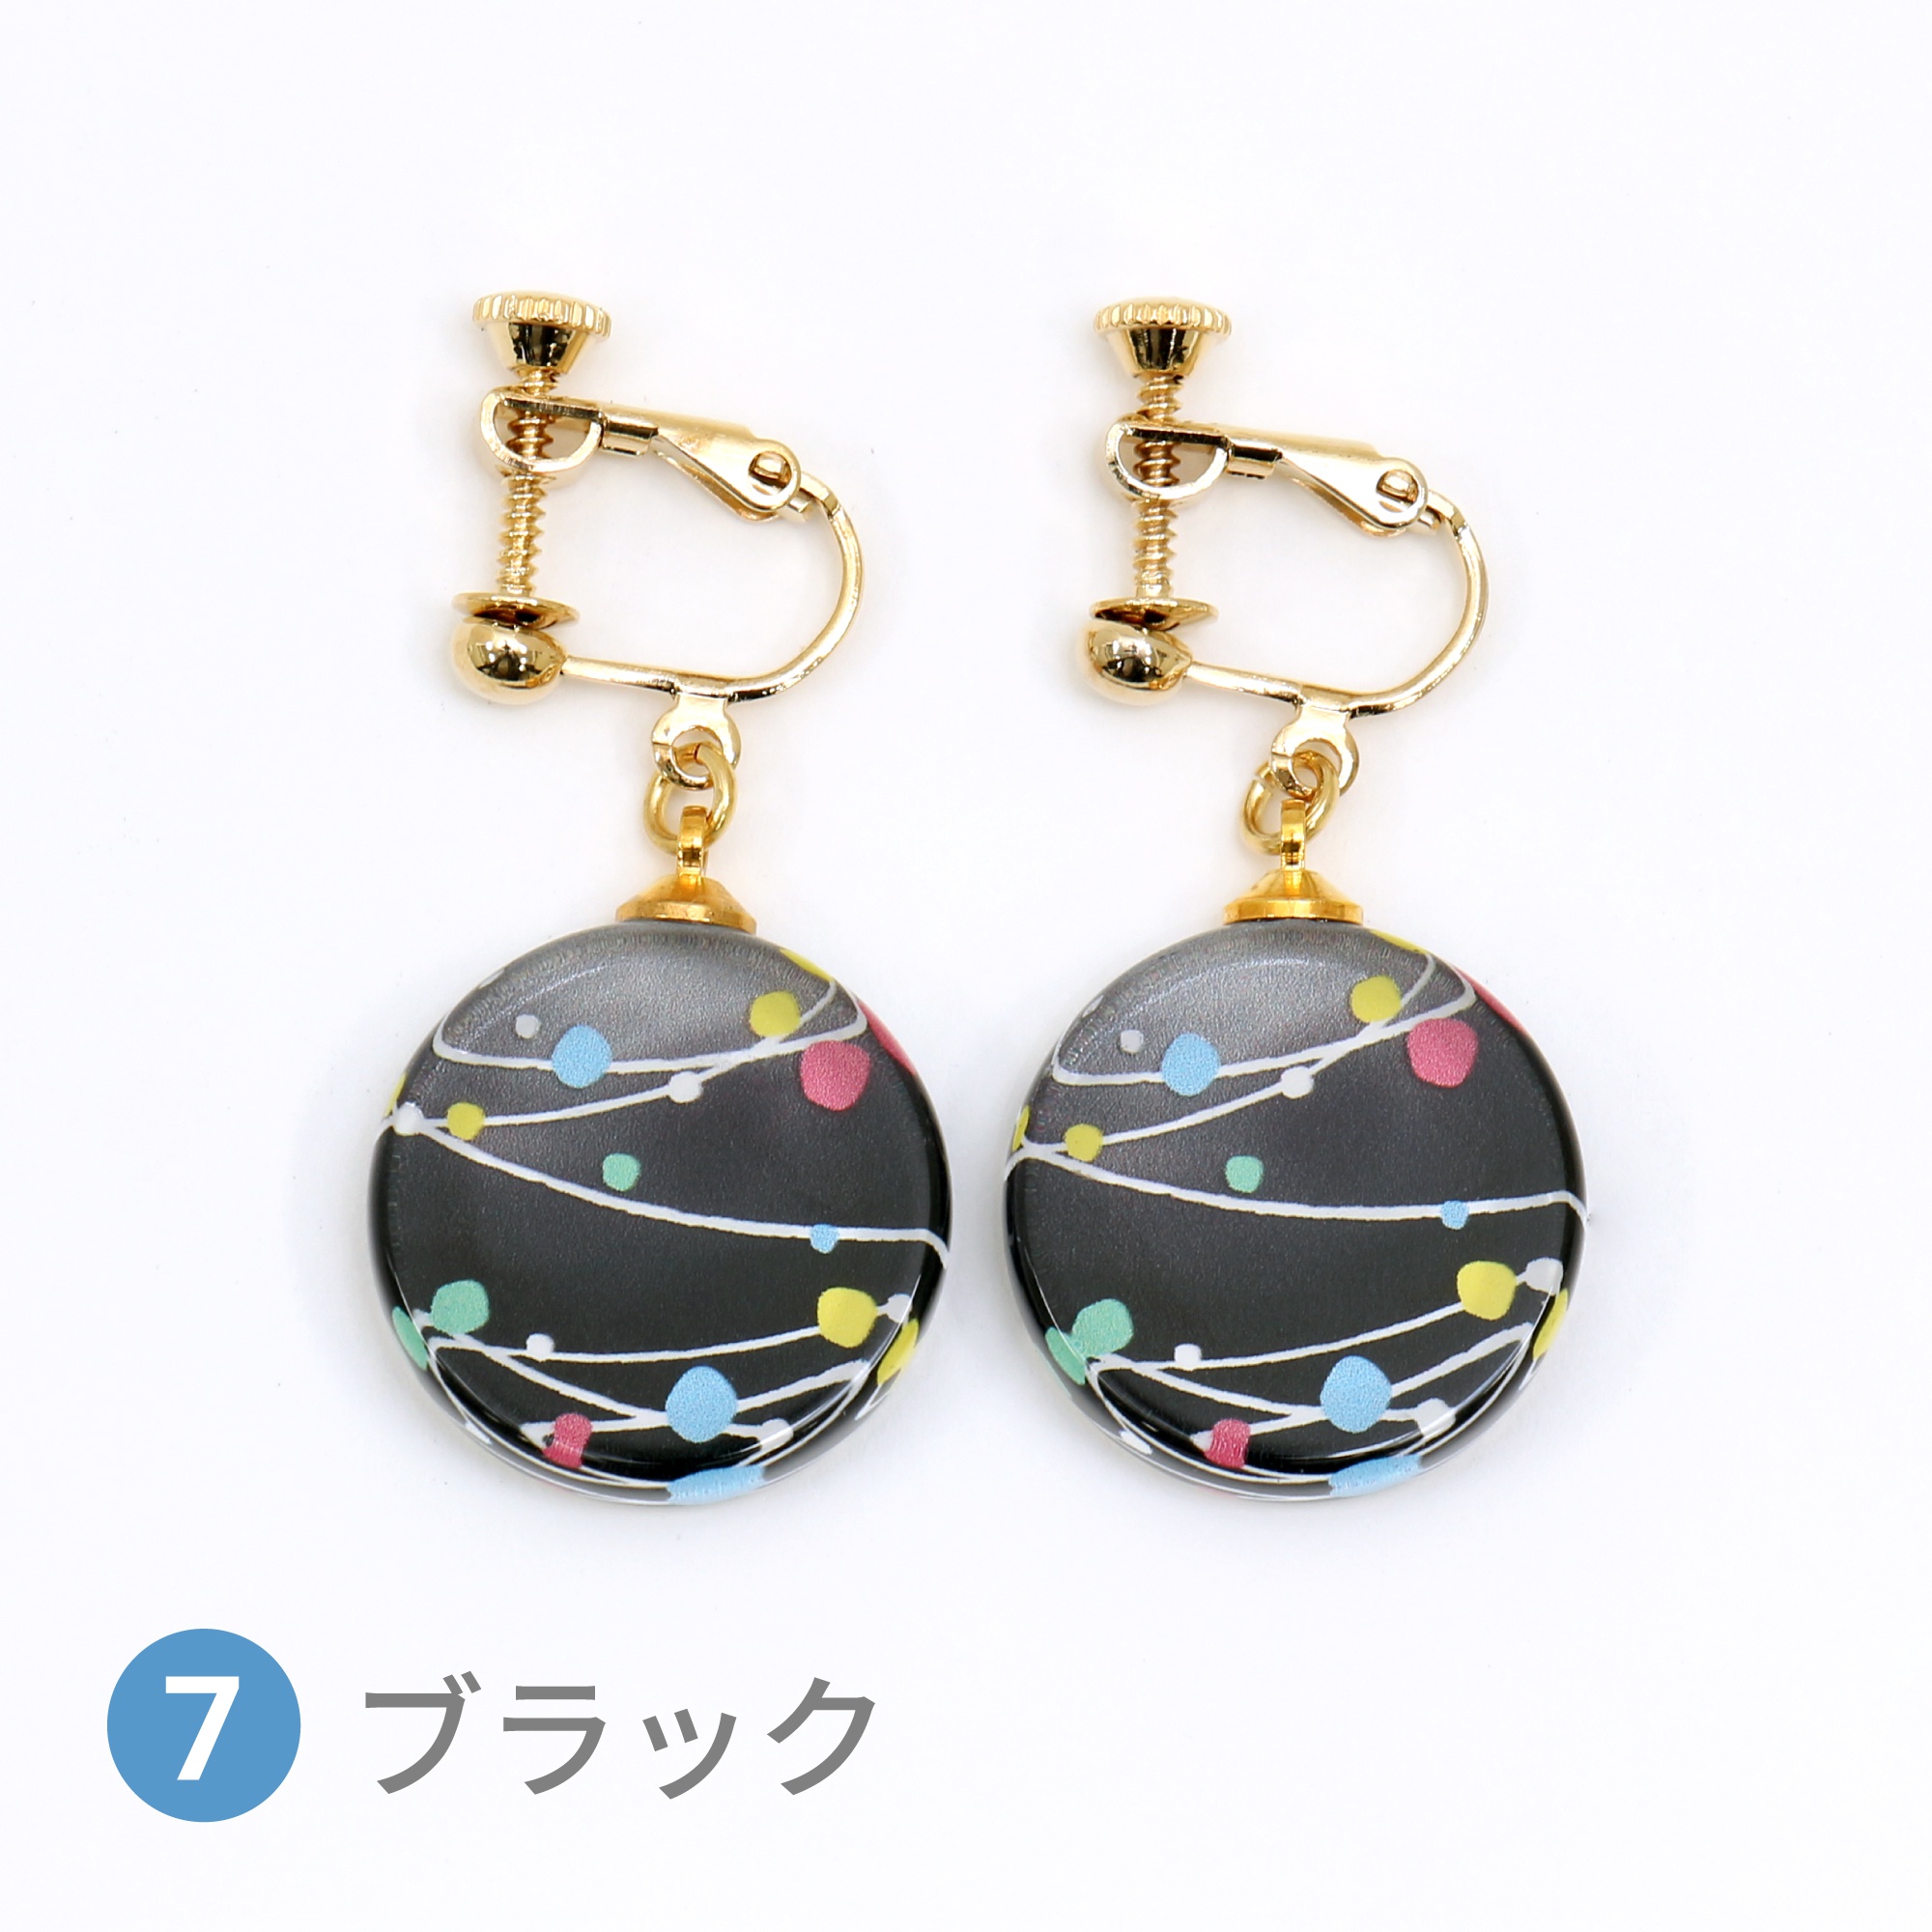 Glass accessories Earring WATER BALLOON black round shape